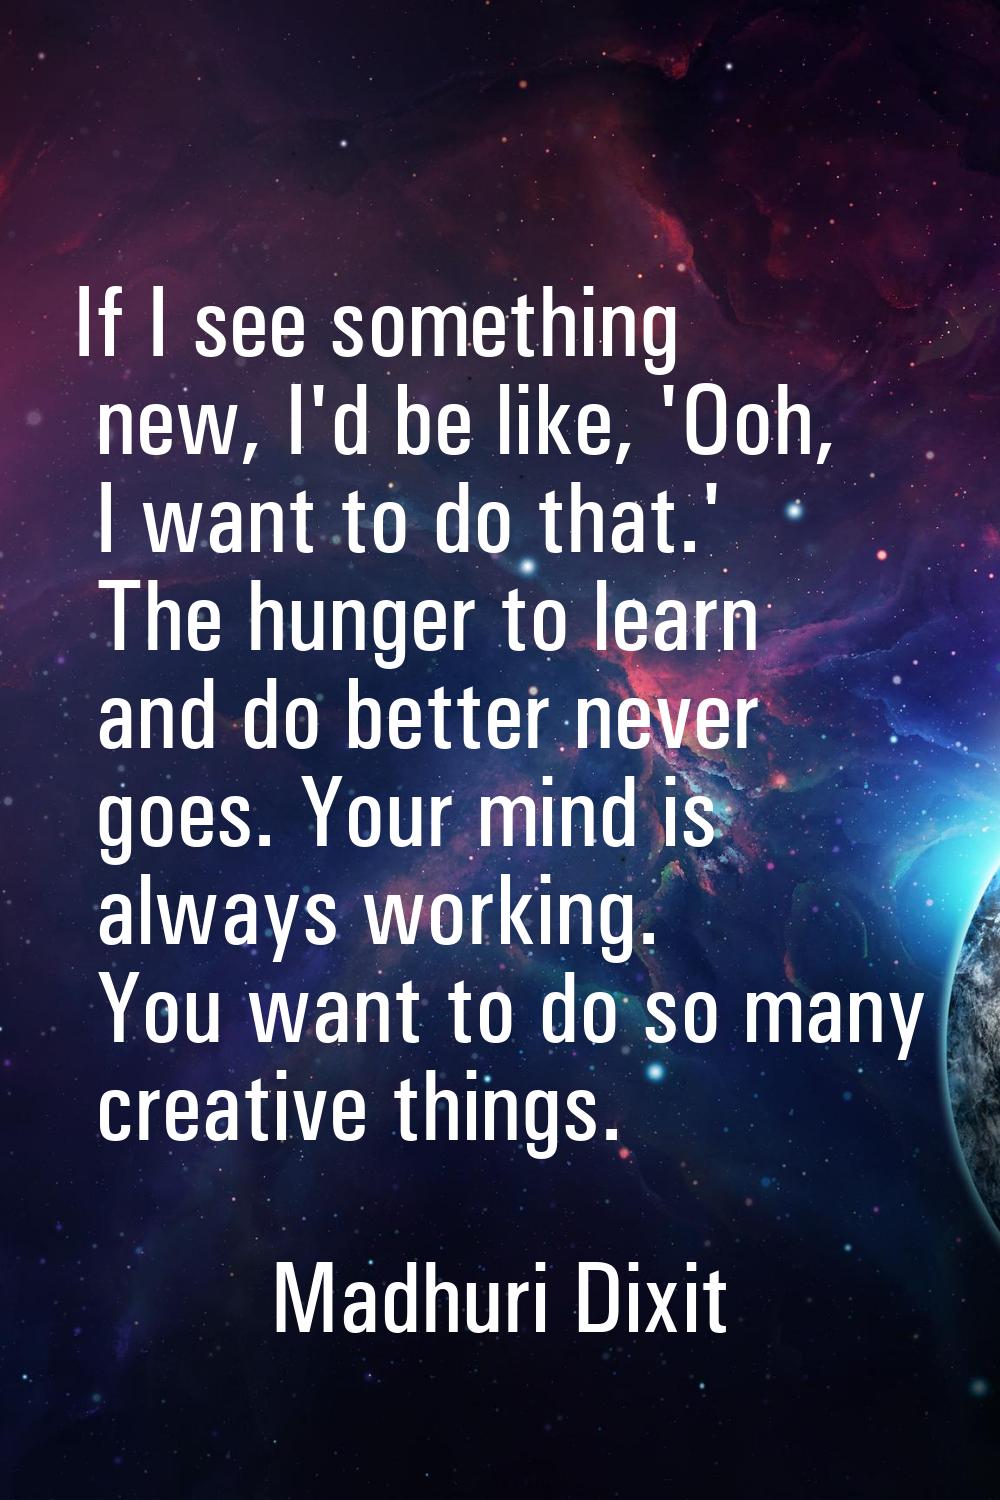 If I see something new, I'd be like, 'Ooh, I want to do that.' The hunger to learn and do better ne